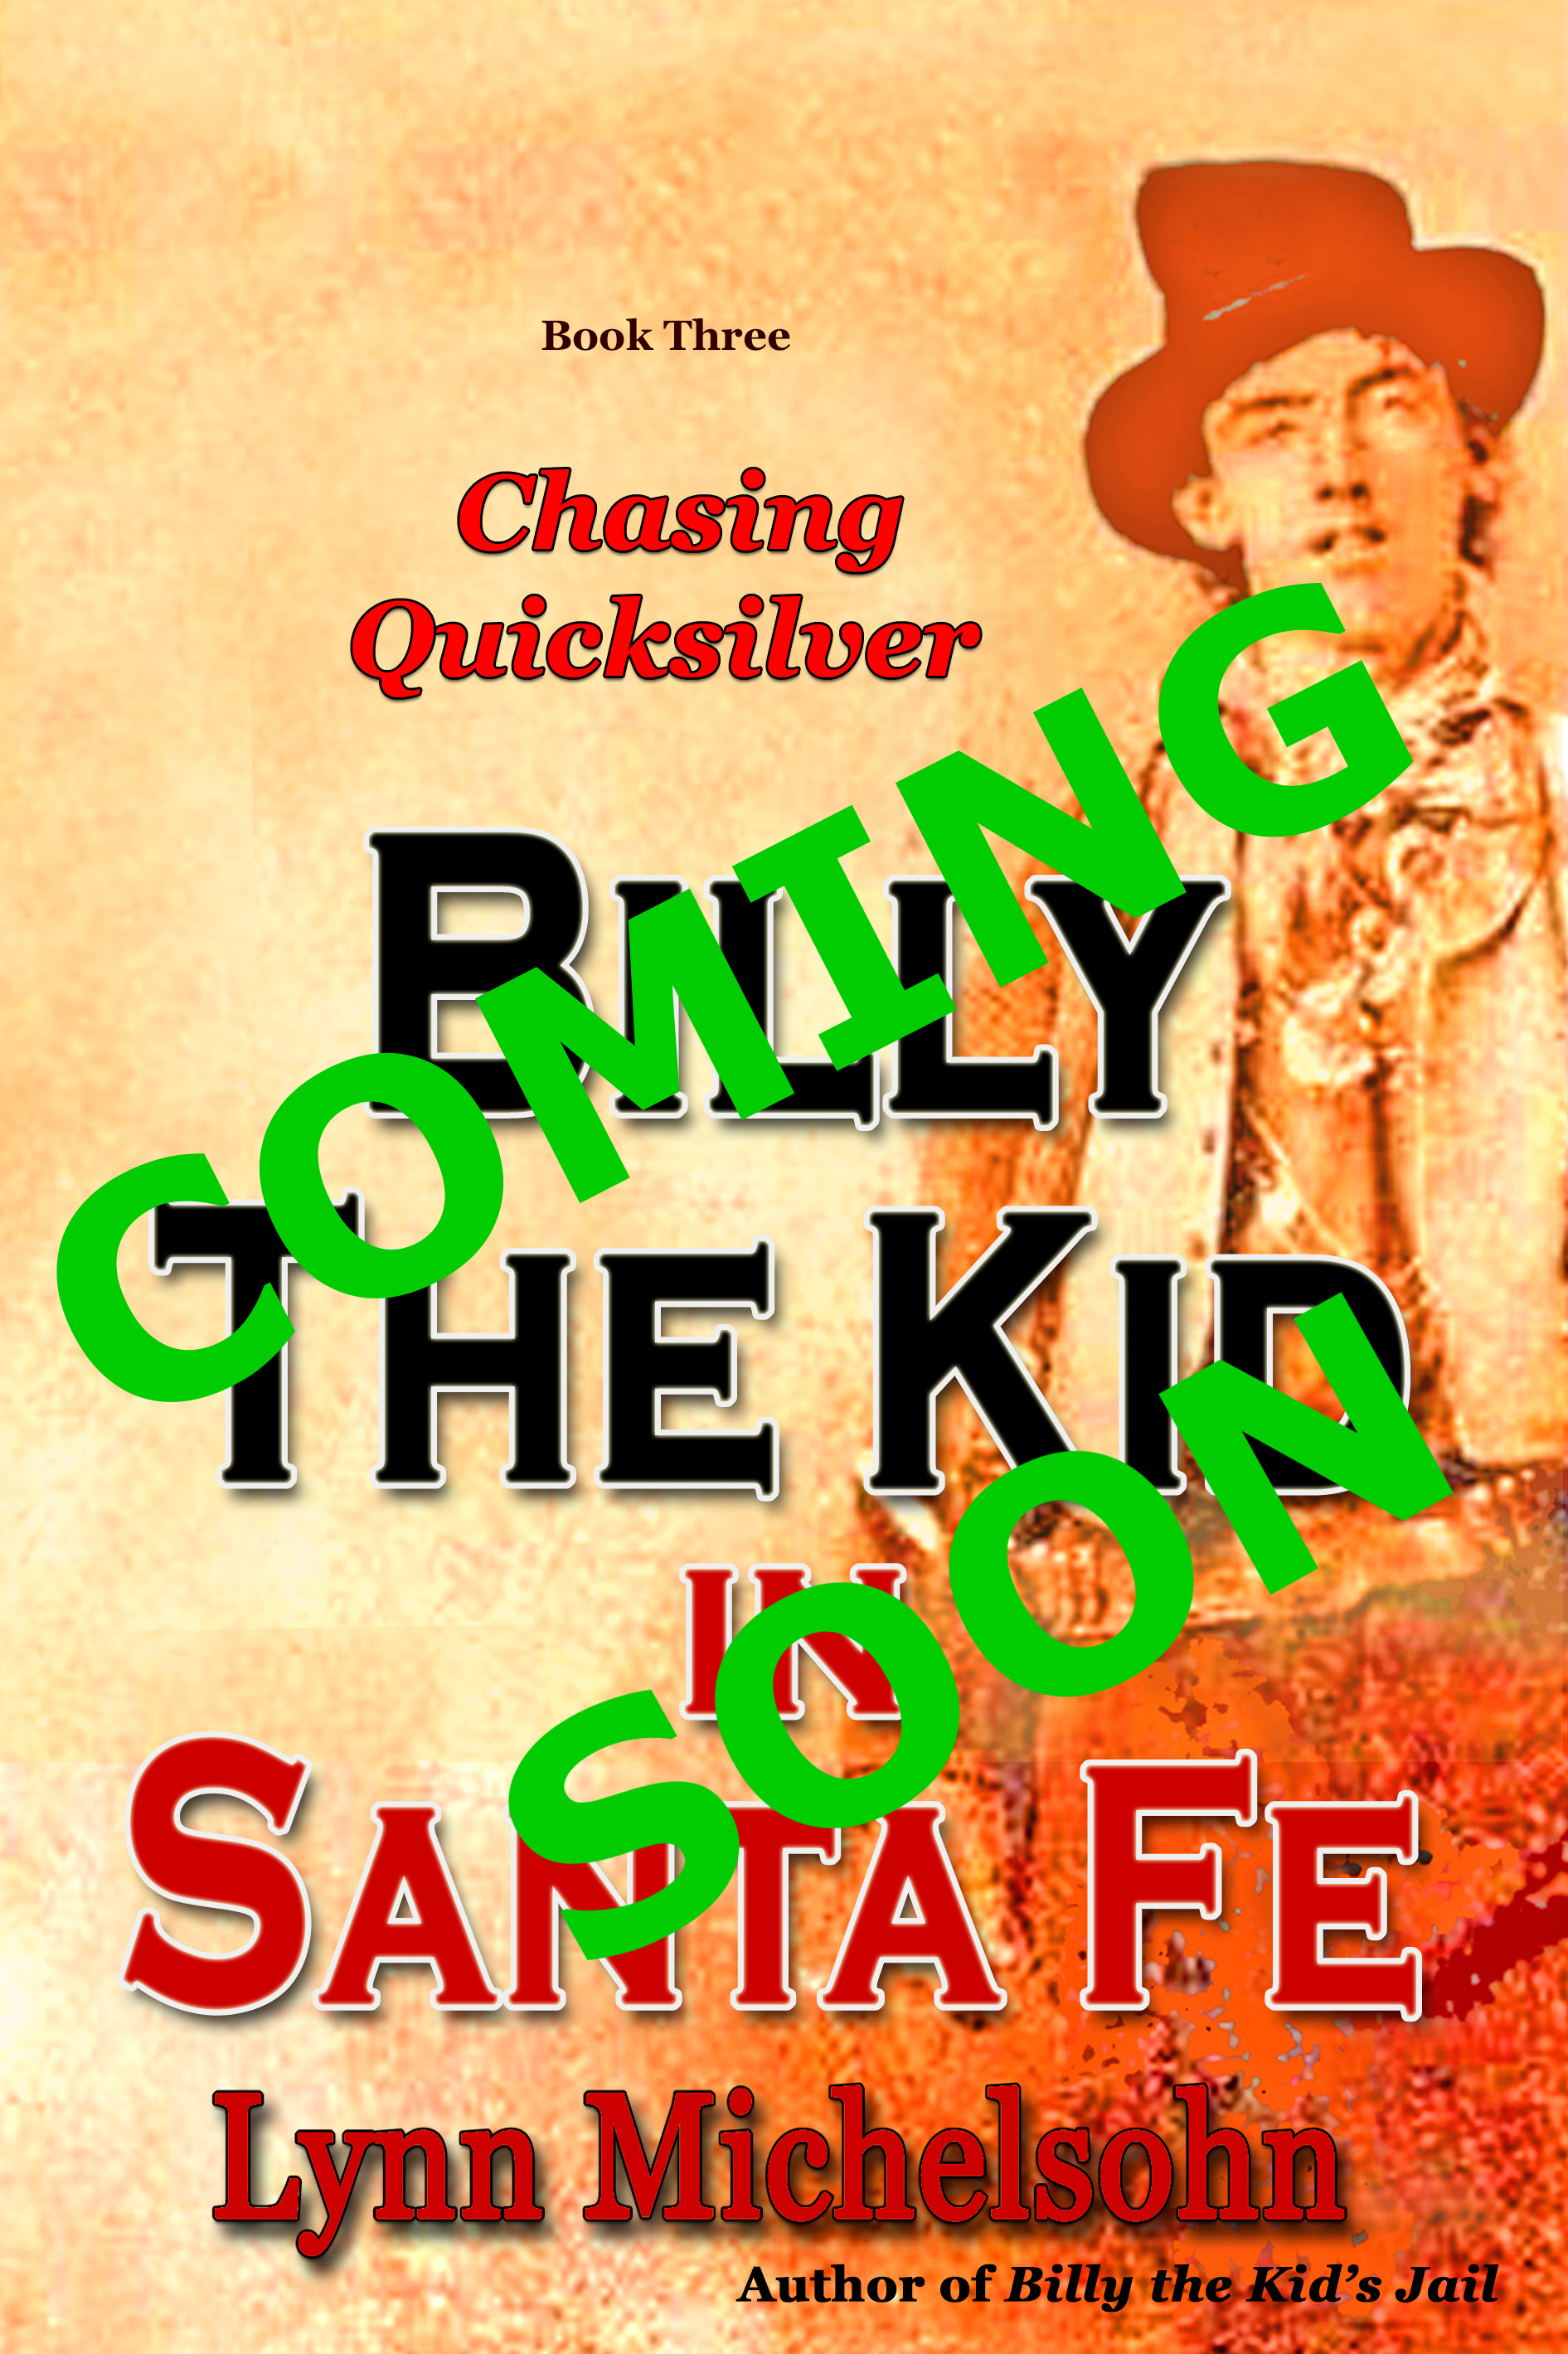 Chasing Quicksilver book cover